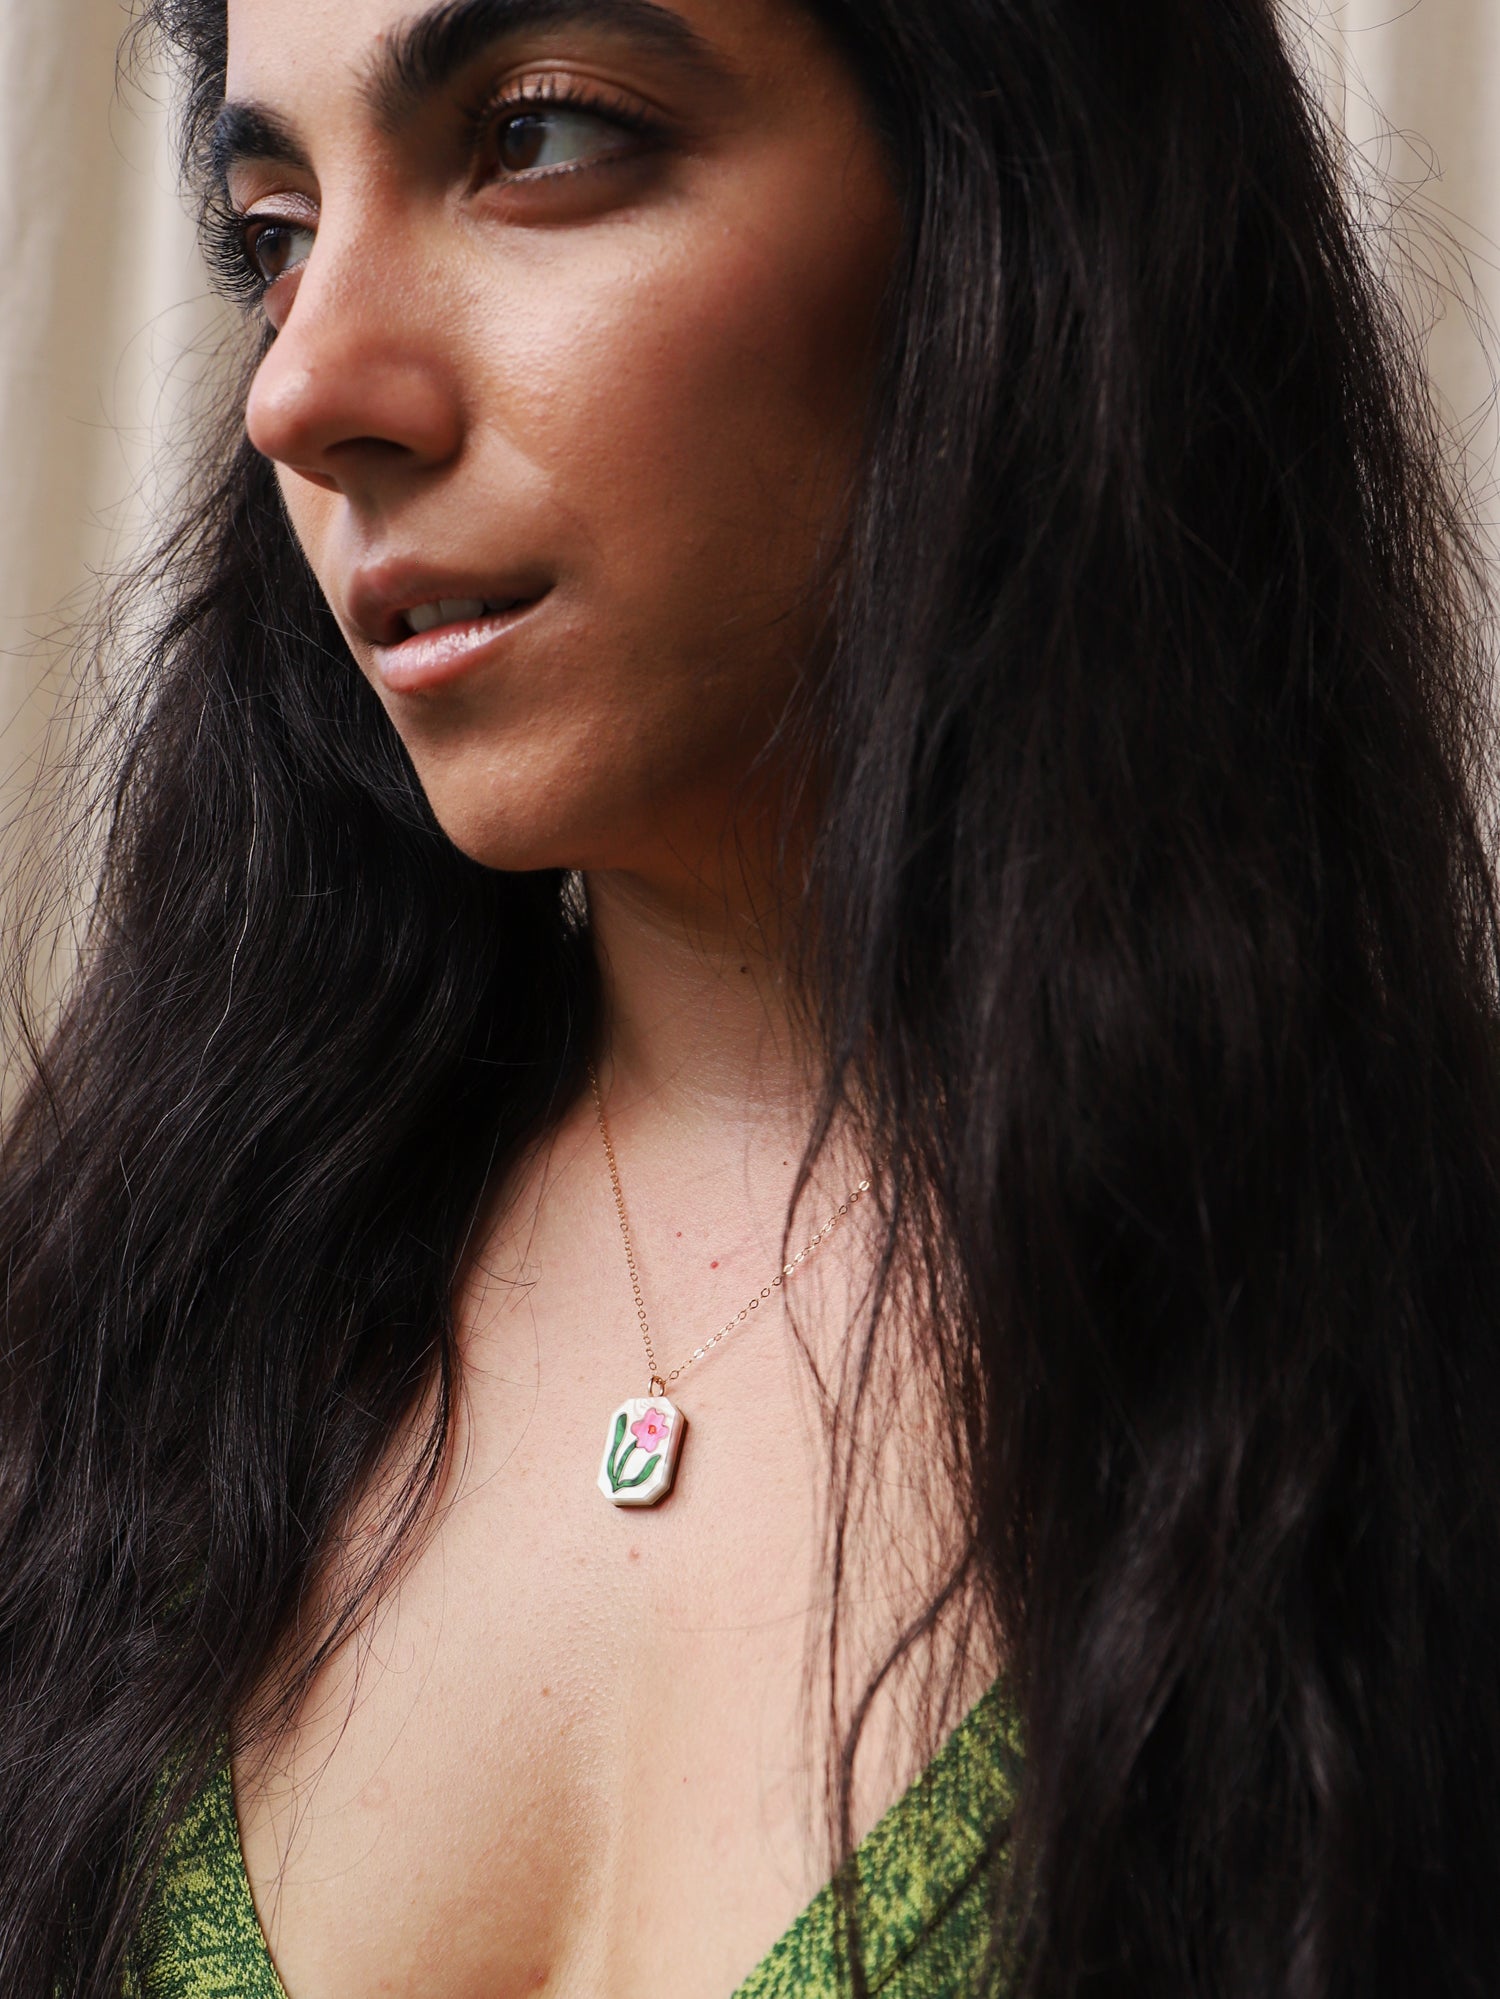 Flower charm necklace made from acrylic and a 14k gold-filled chain & findings. Handmade in the UK by Wolf & Moon